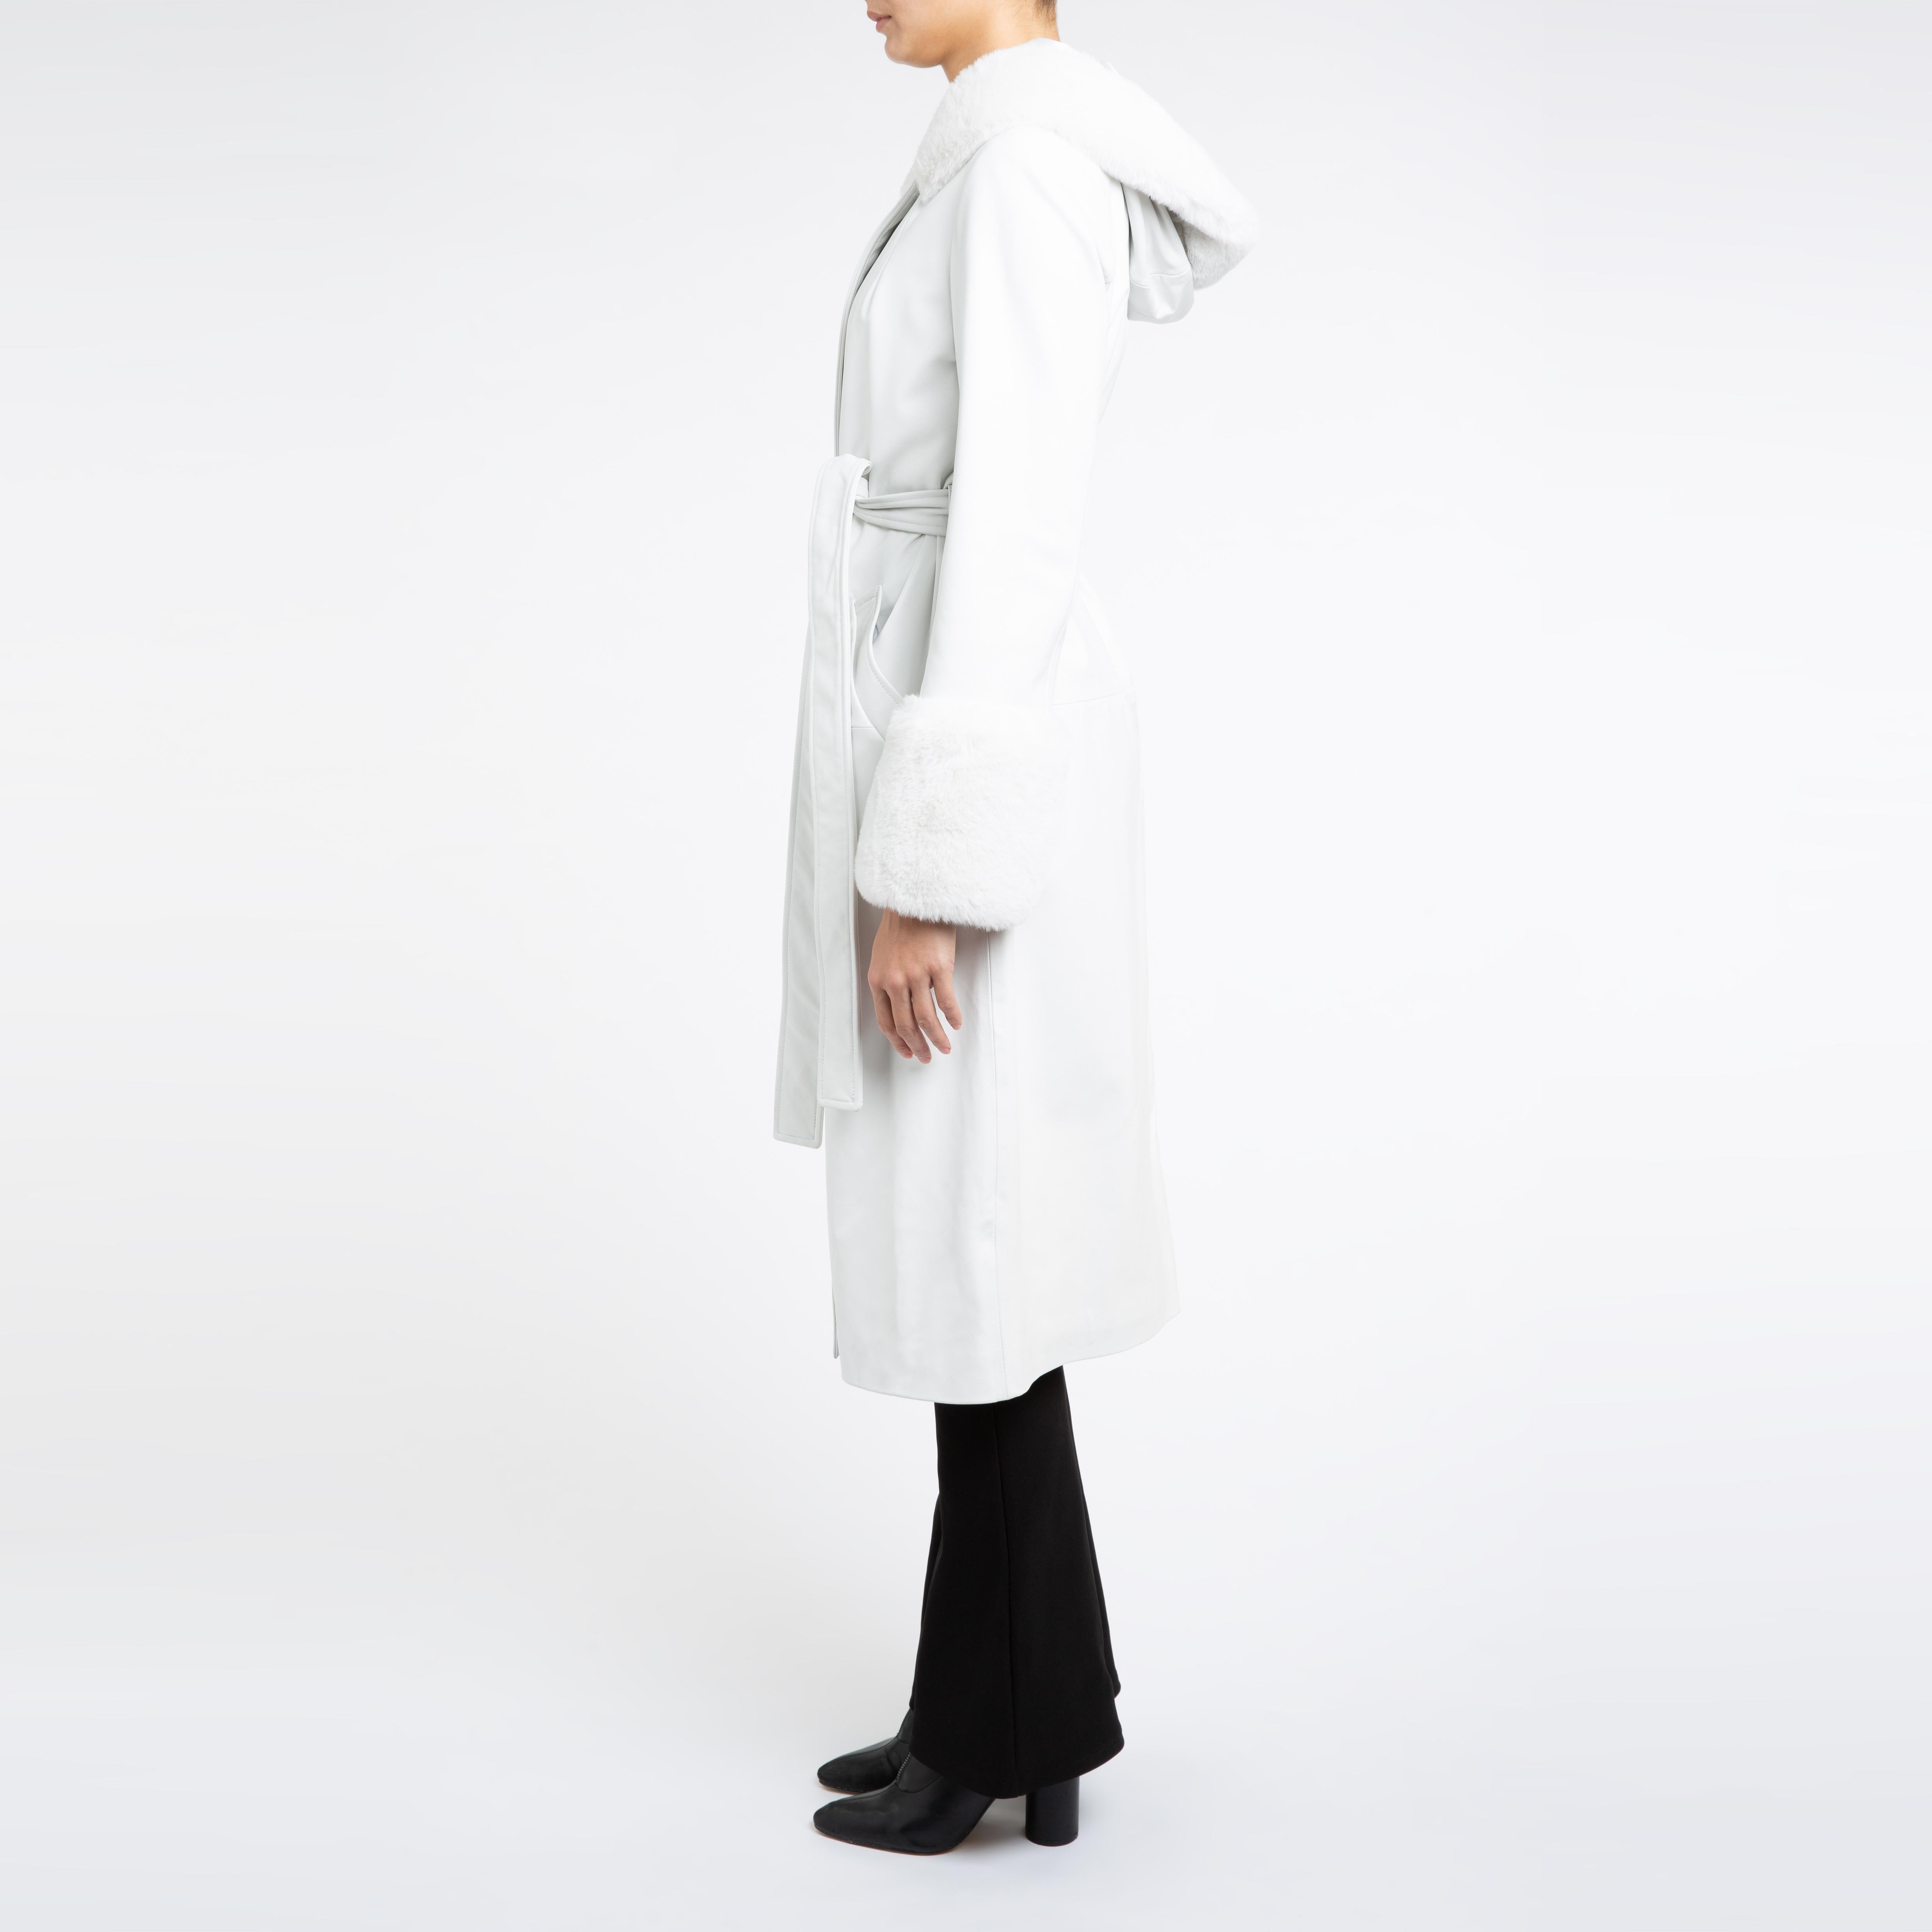 Verheyen Aurora Hooded Leather Trench Coat in White with Faux Fur - Size uk 16 In New Condition For Sale In London, GB